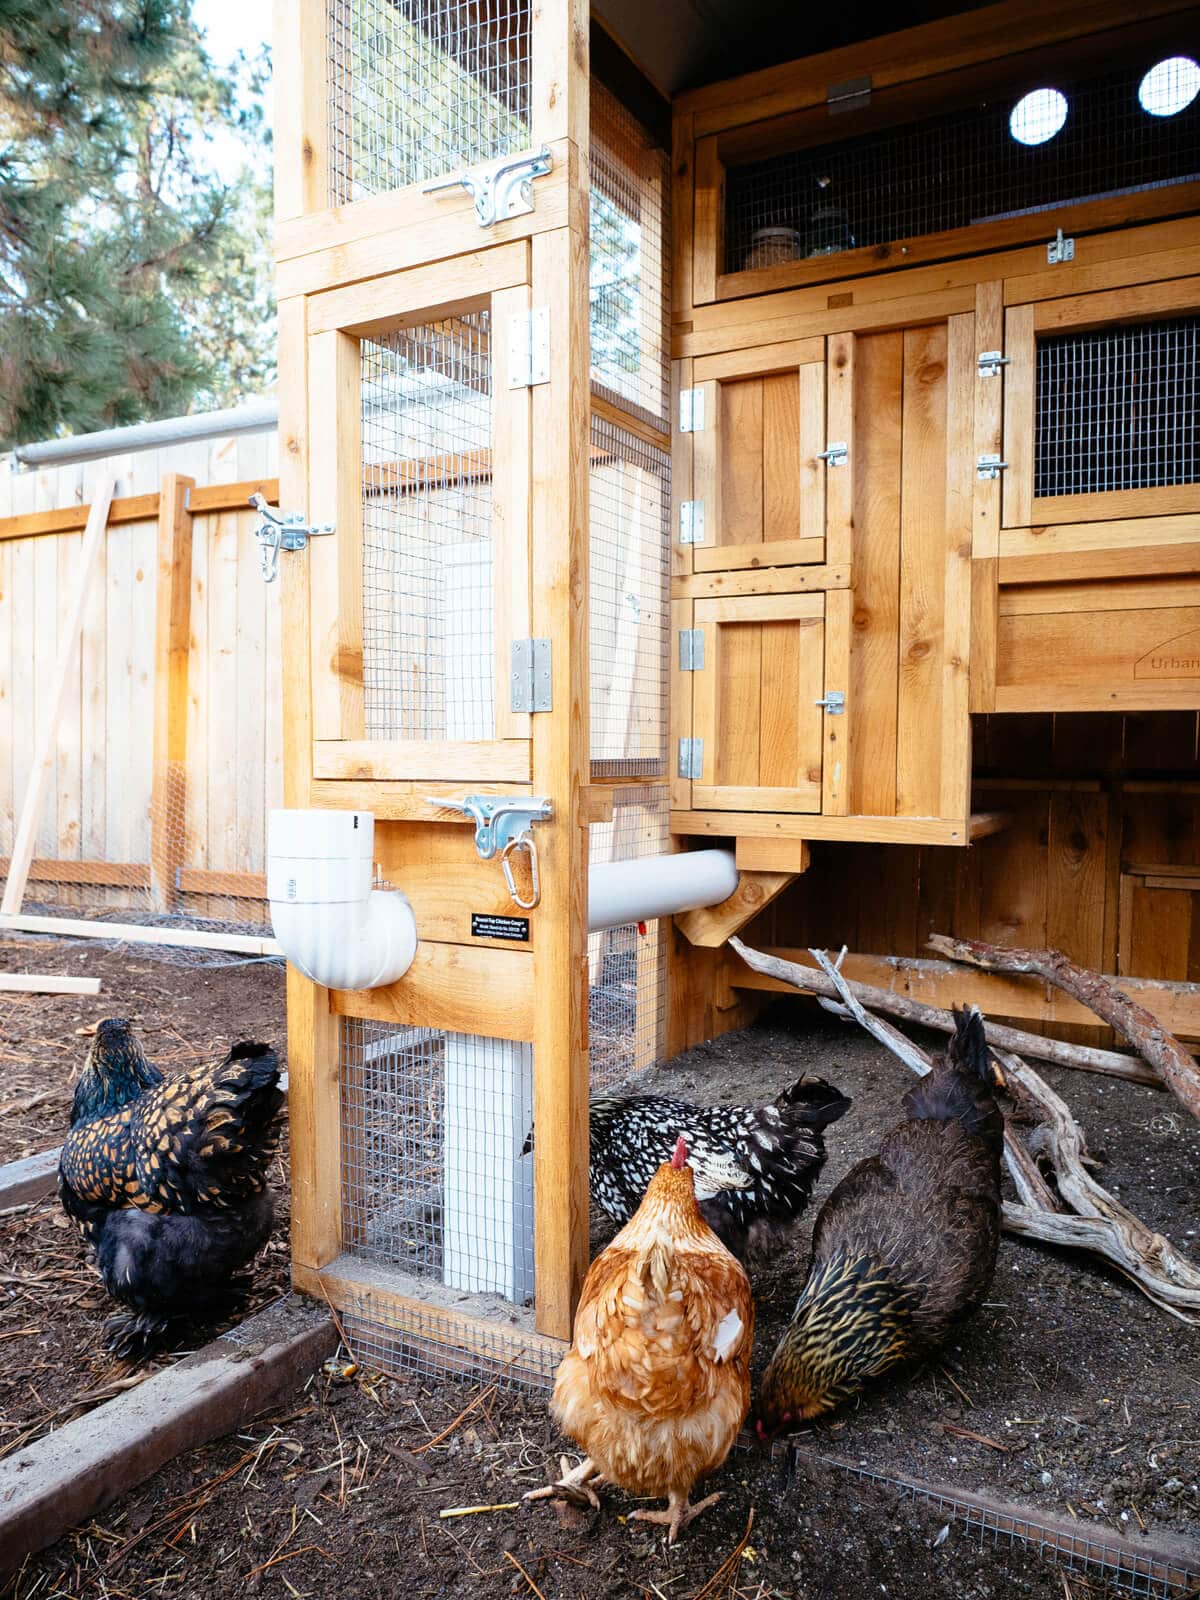 Security for Chicken Coops: Tips for Predator-Proofing and Protecting Your Backyard Flock